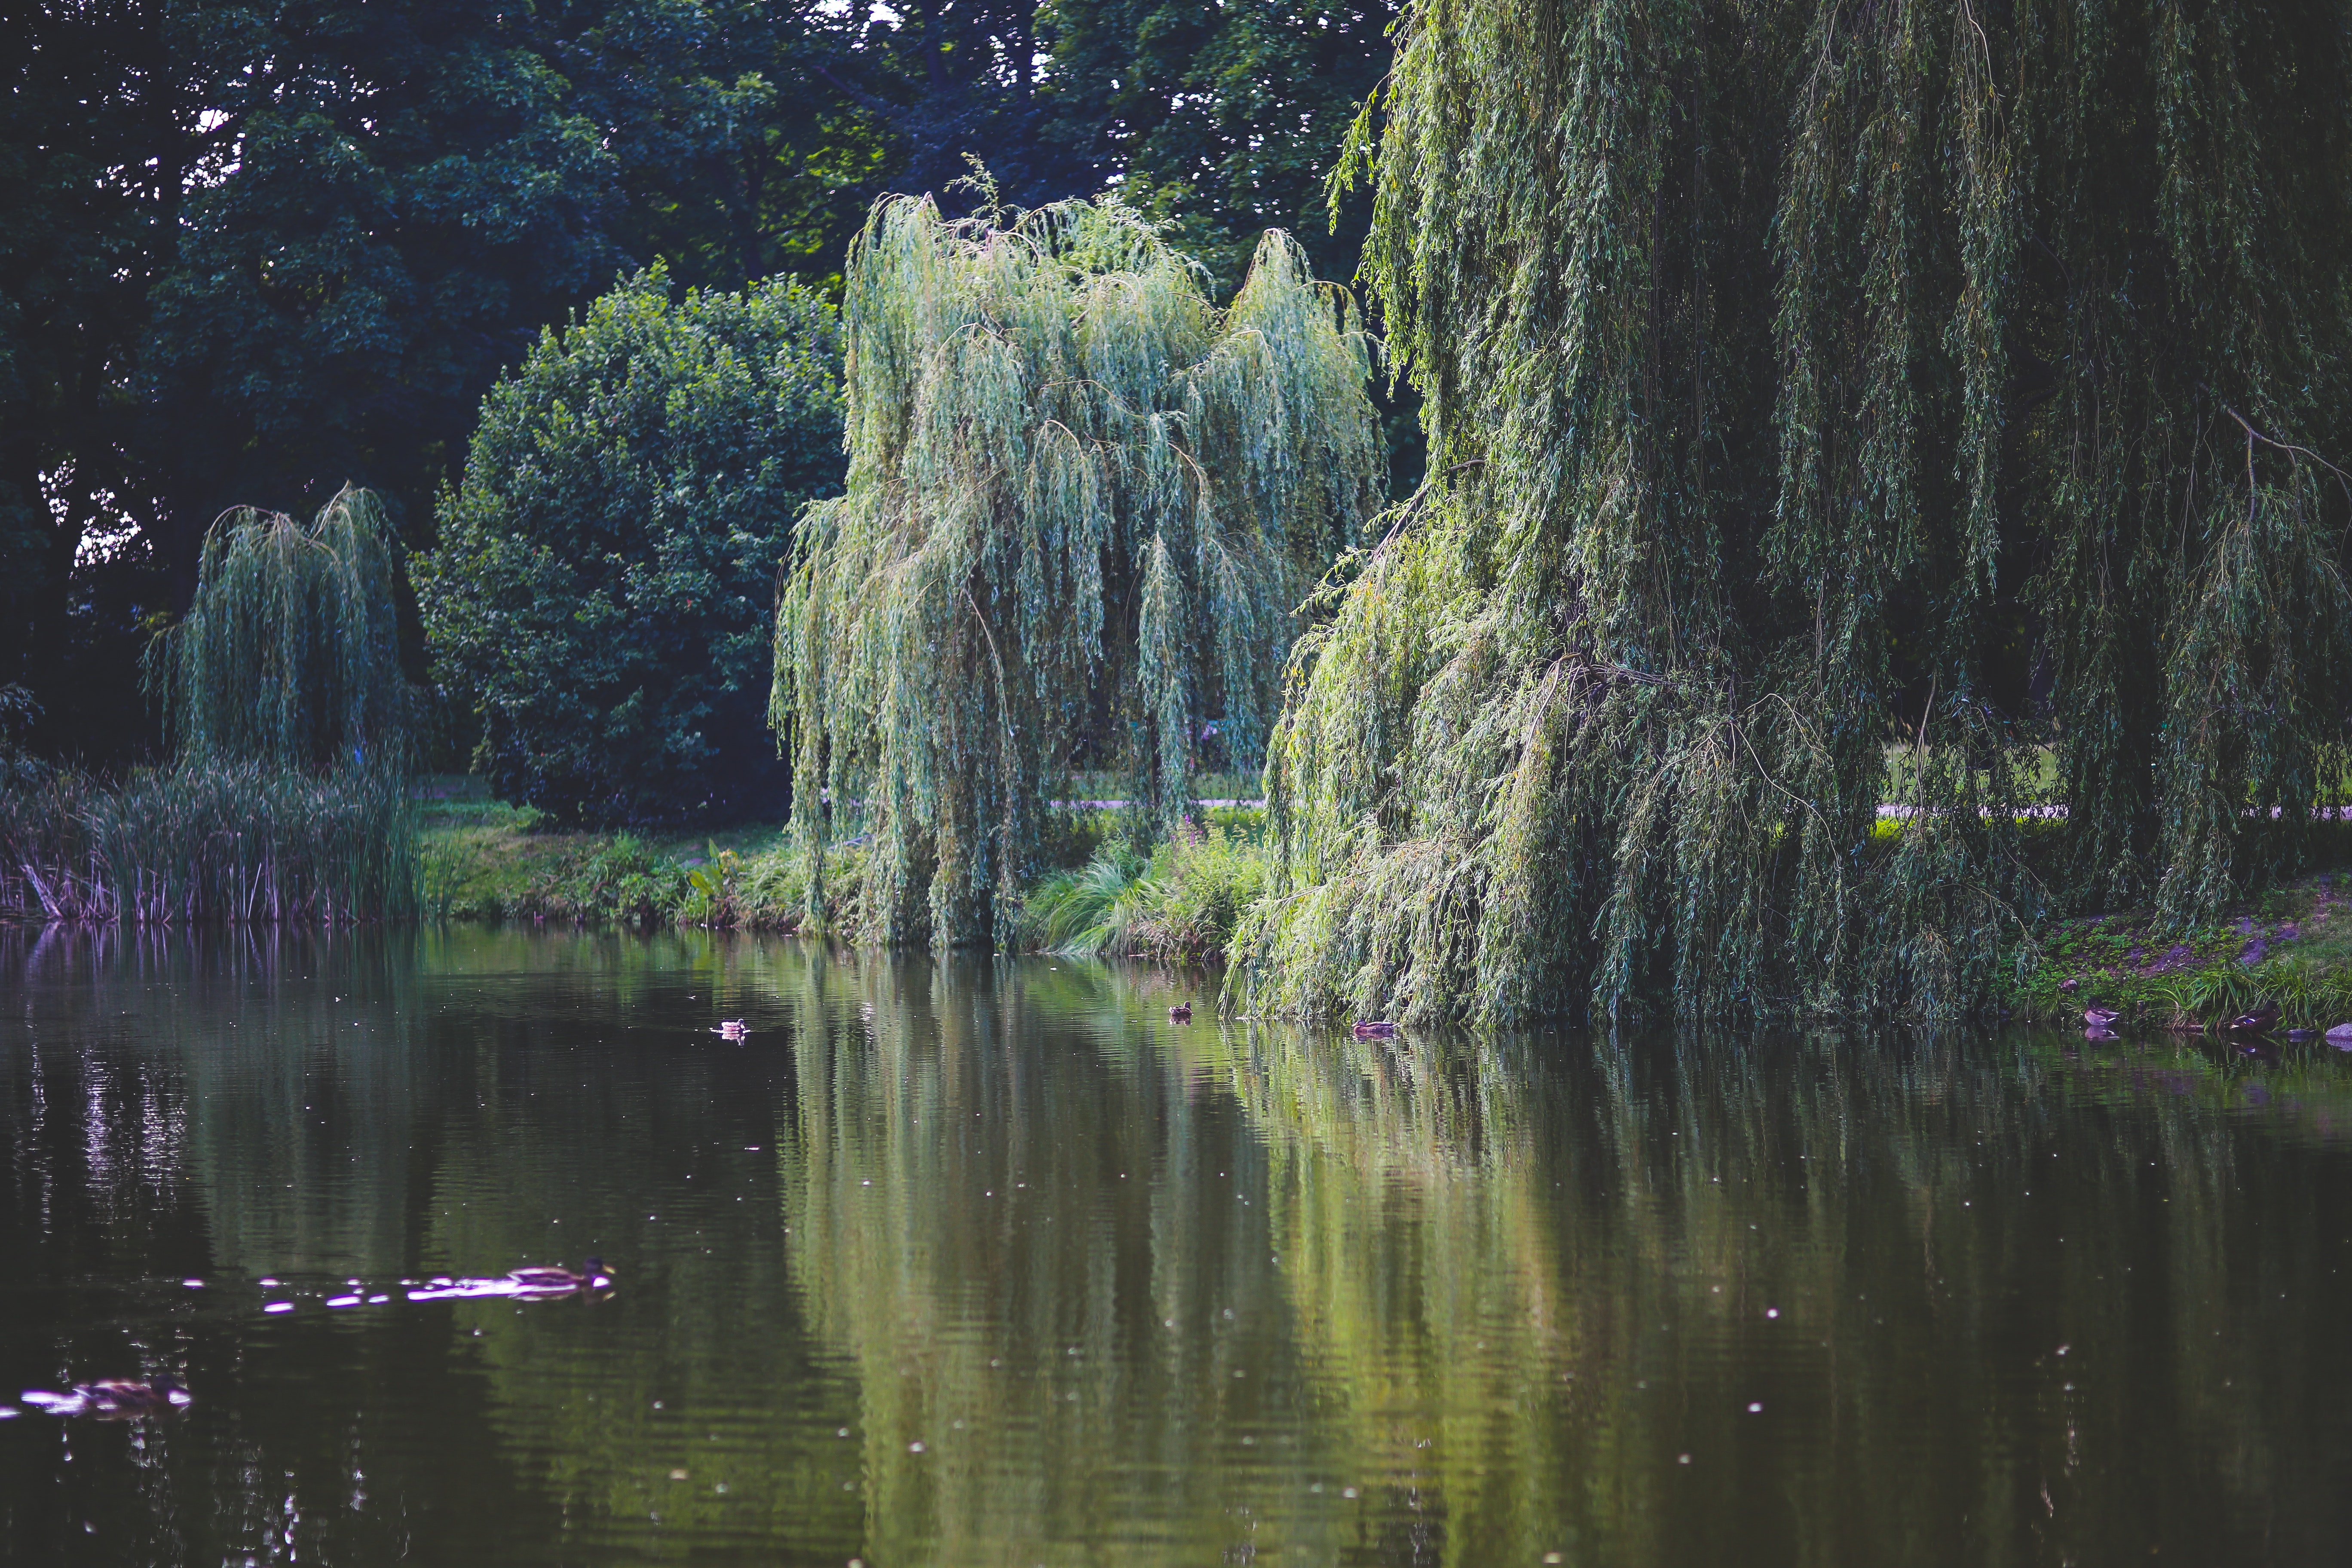 Willow that grow along the river, Beautiful, Reflection, Willow, Waterside, HQ Photo